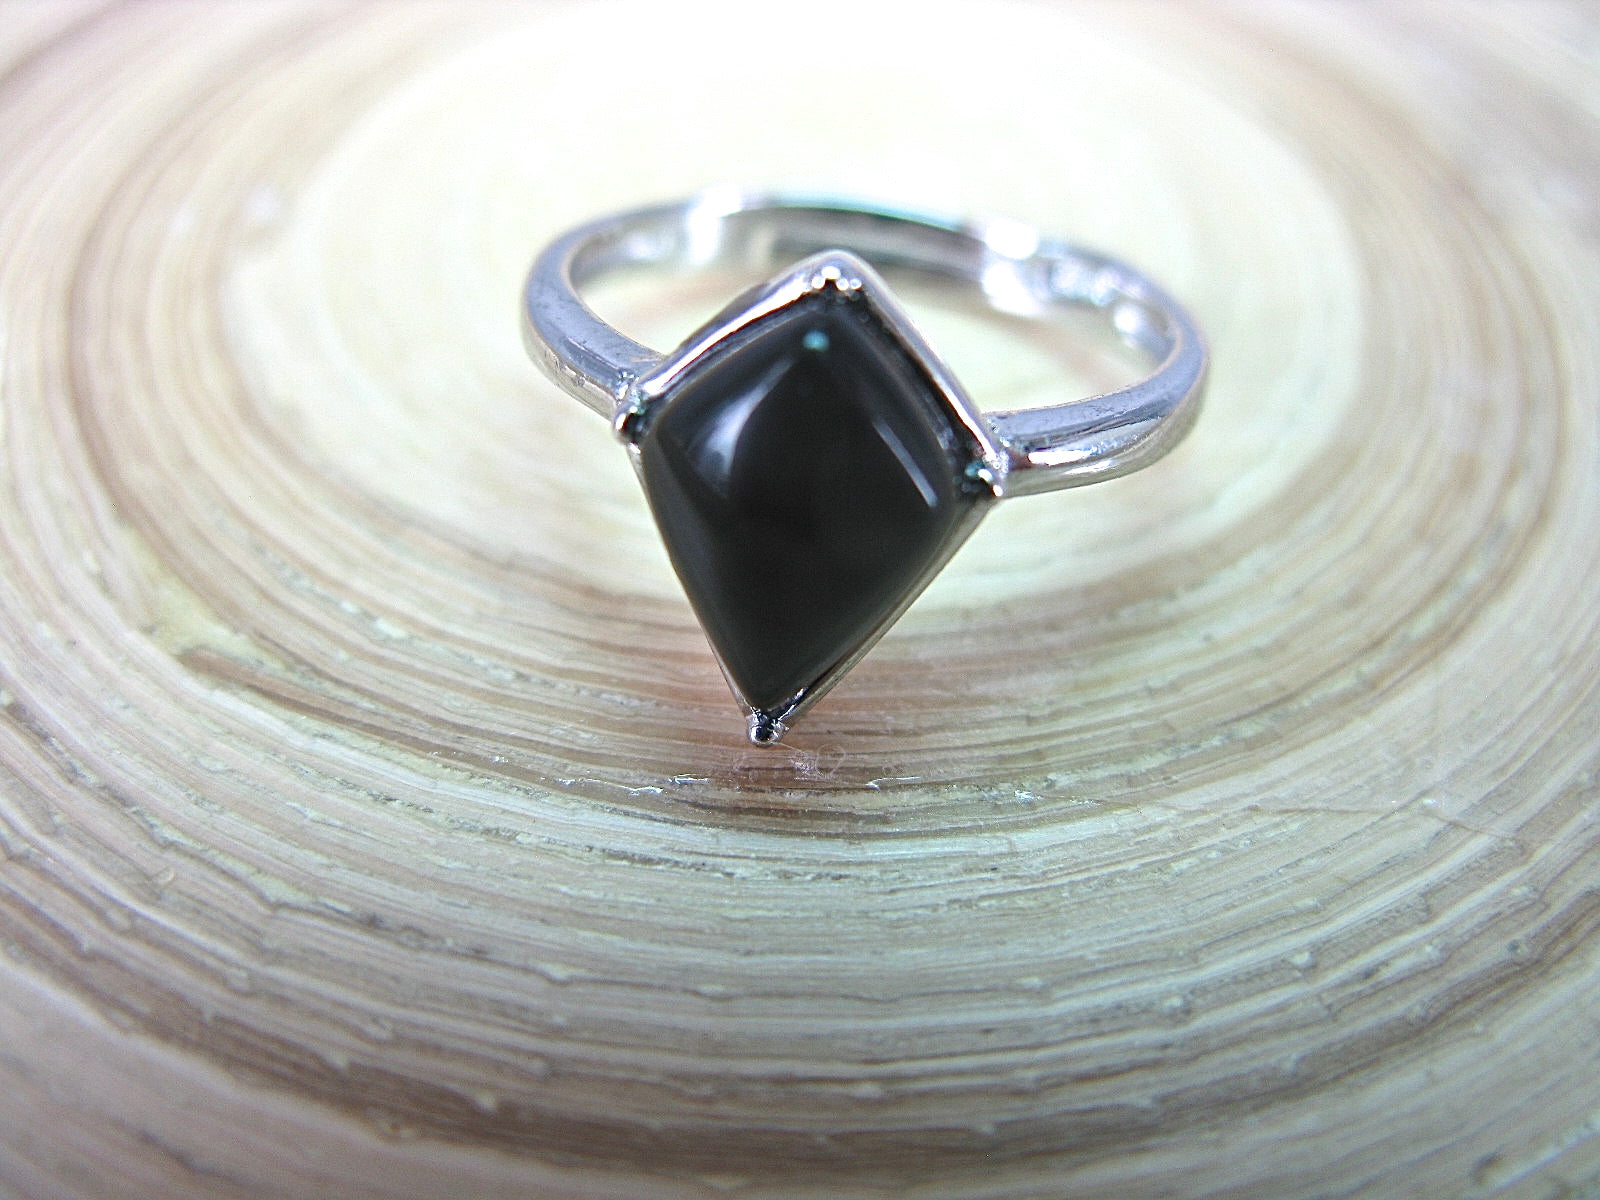 Kite Shaped Black Stone Ring in 925 Sterling Silver